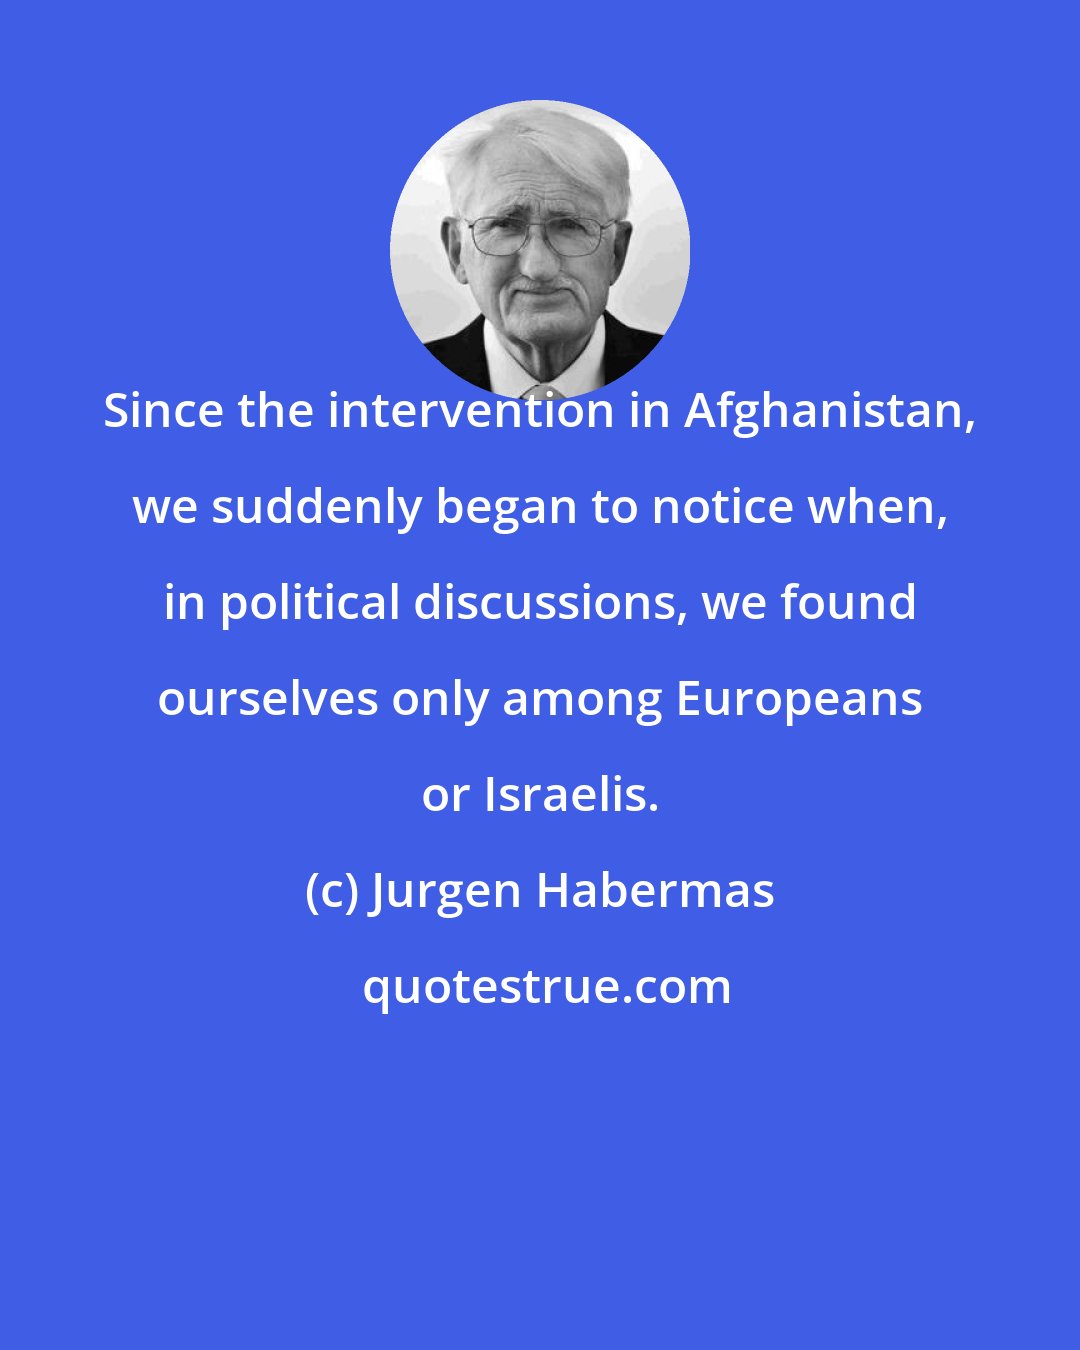 Jurgen Habermas: Since the intervention in Afghanistan, we suddenly began to notice when, in political discussions, we found ourselves only among Europeans or Israelis.